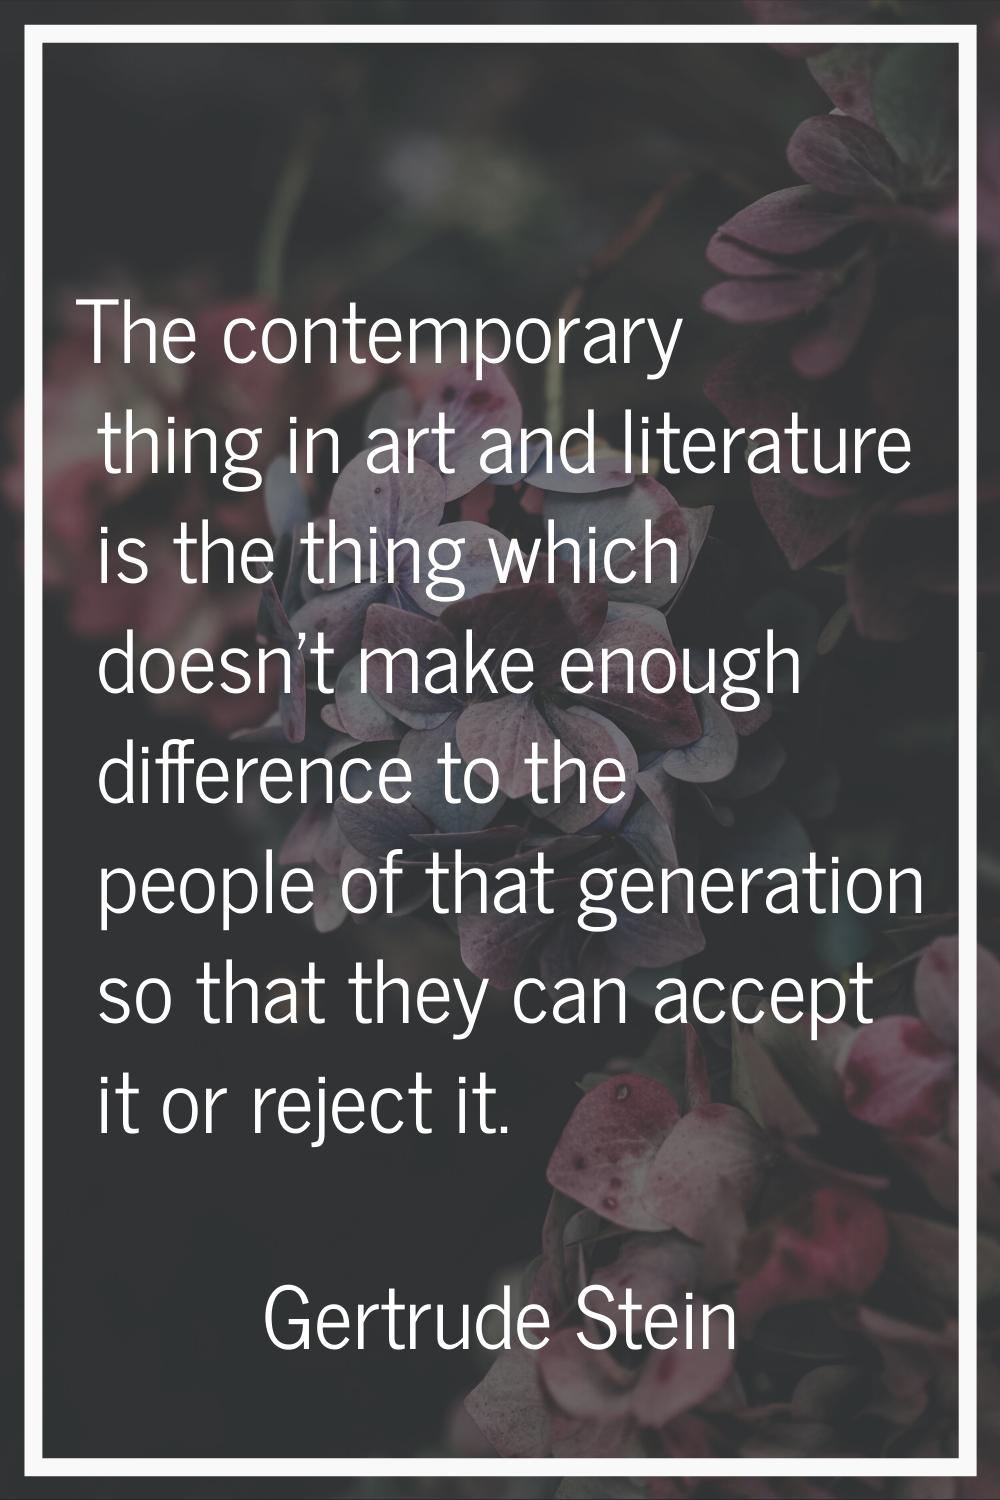 The contemporary thing in art and literature is the thing which doesn't make enough difference to t